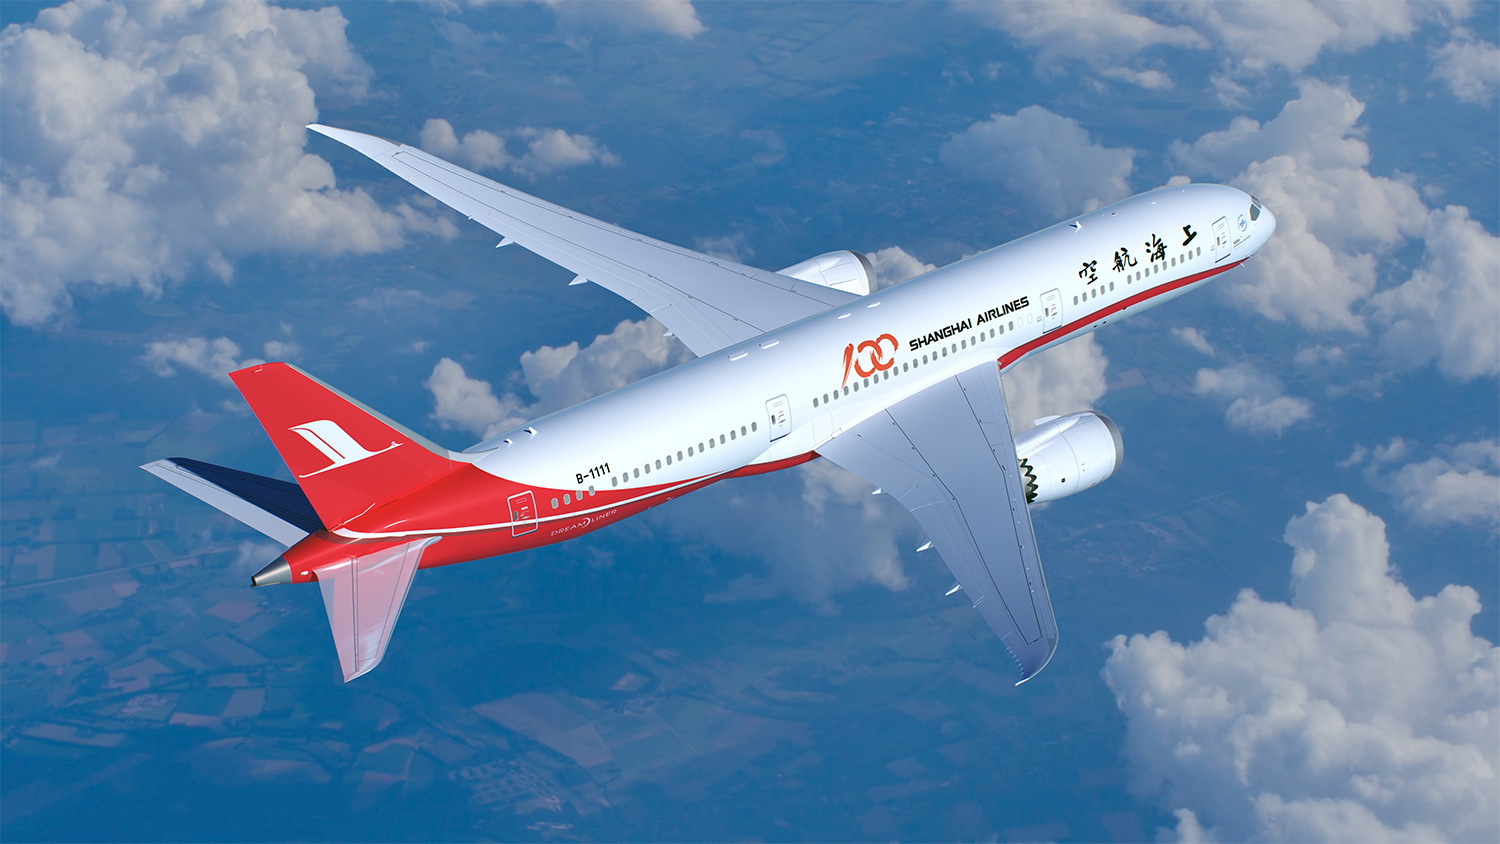 Shanghai Airlines Boeing 787-9. Click to enlarge.